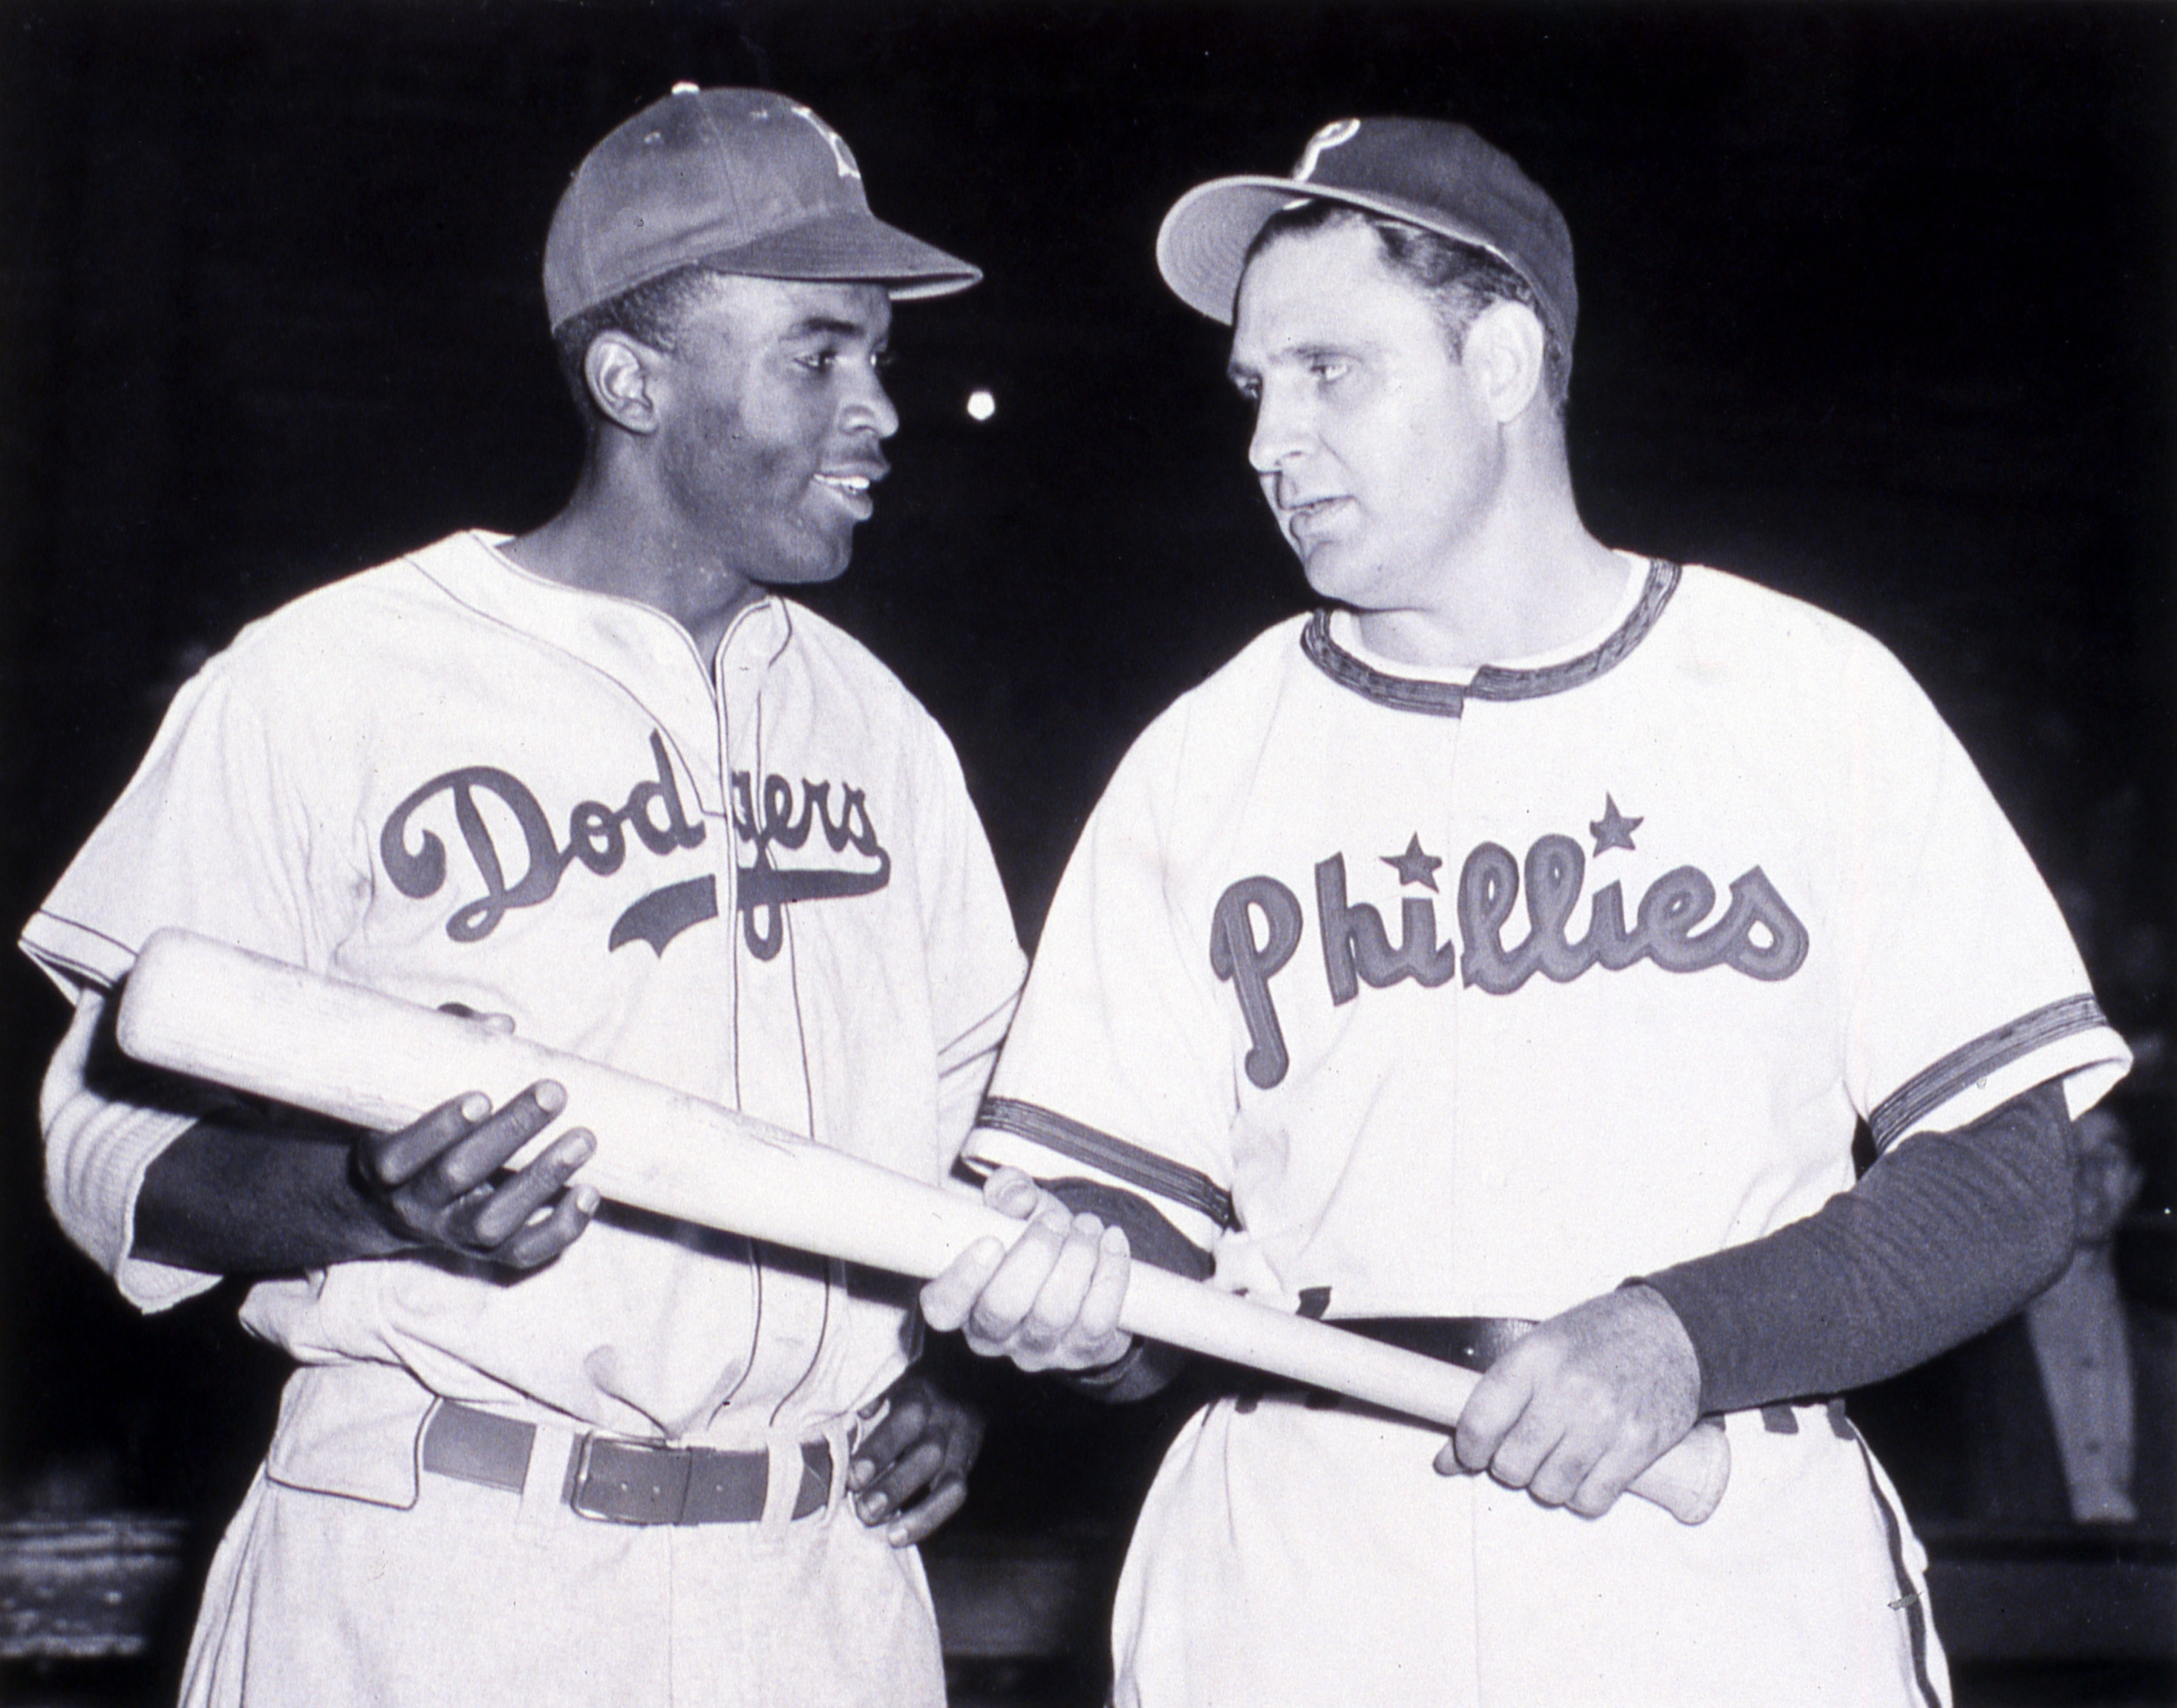 Jackie Robinson of the Brooklyn Dodgers, left, poses for a photo with Philadelphia Phillies manager Ben Chapman, who had instructed his players to unleash a torrent of racist verbal abuse against the Dodgers' rookie when the teams first met on April 22, 1947. (SABR-RUCKER ARCHIVE)